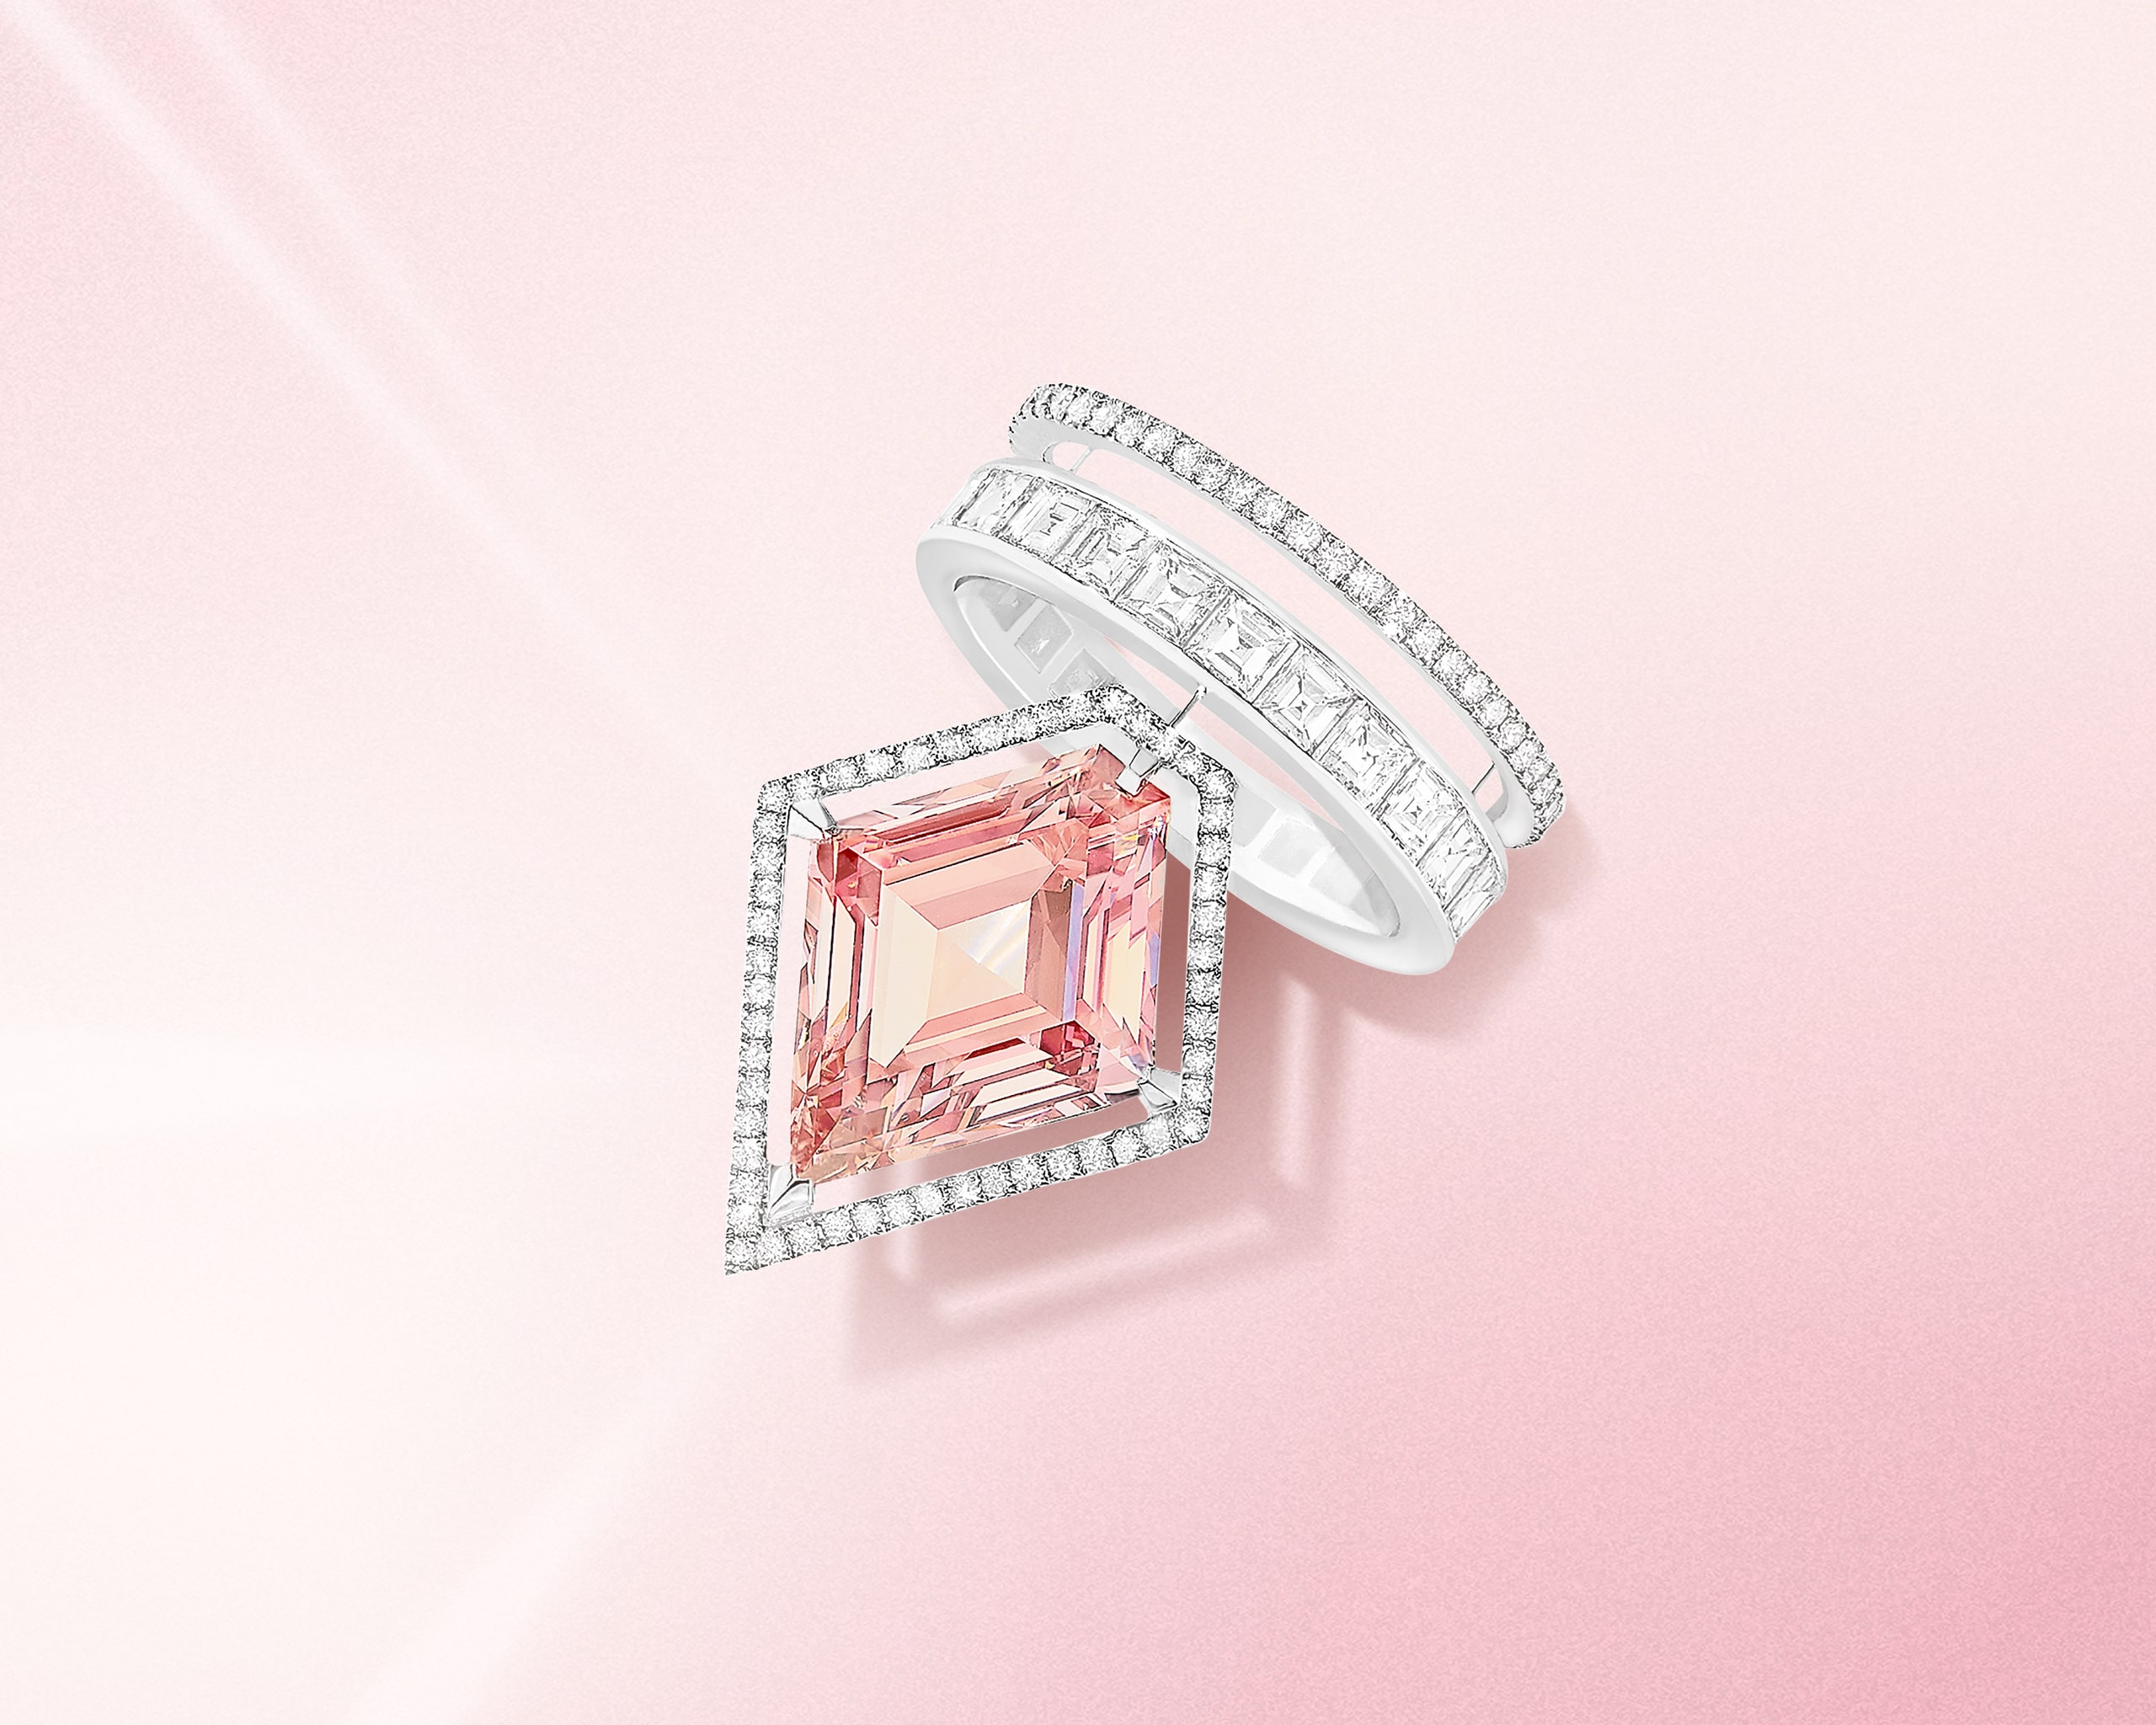 Kite cut pink diamond ring with the halo and 2 row pave diamond band